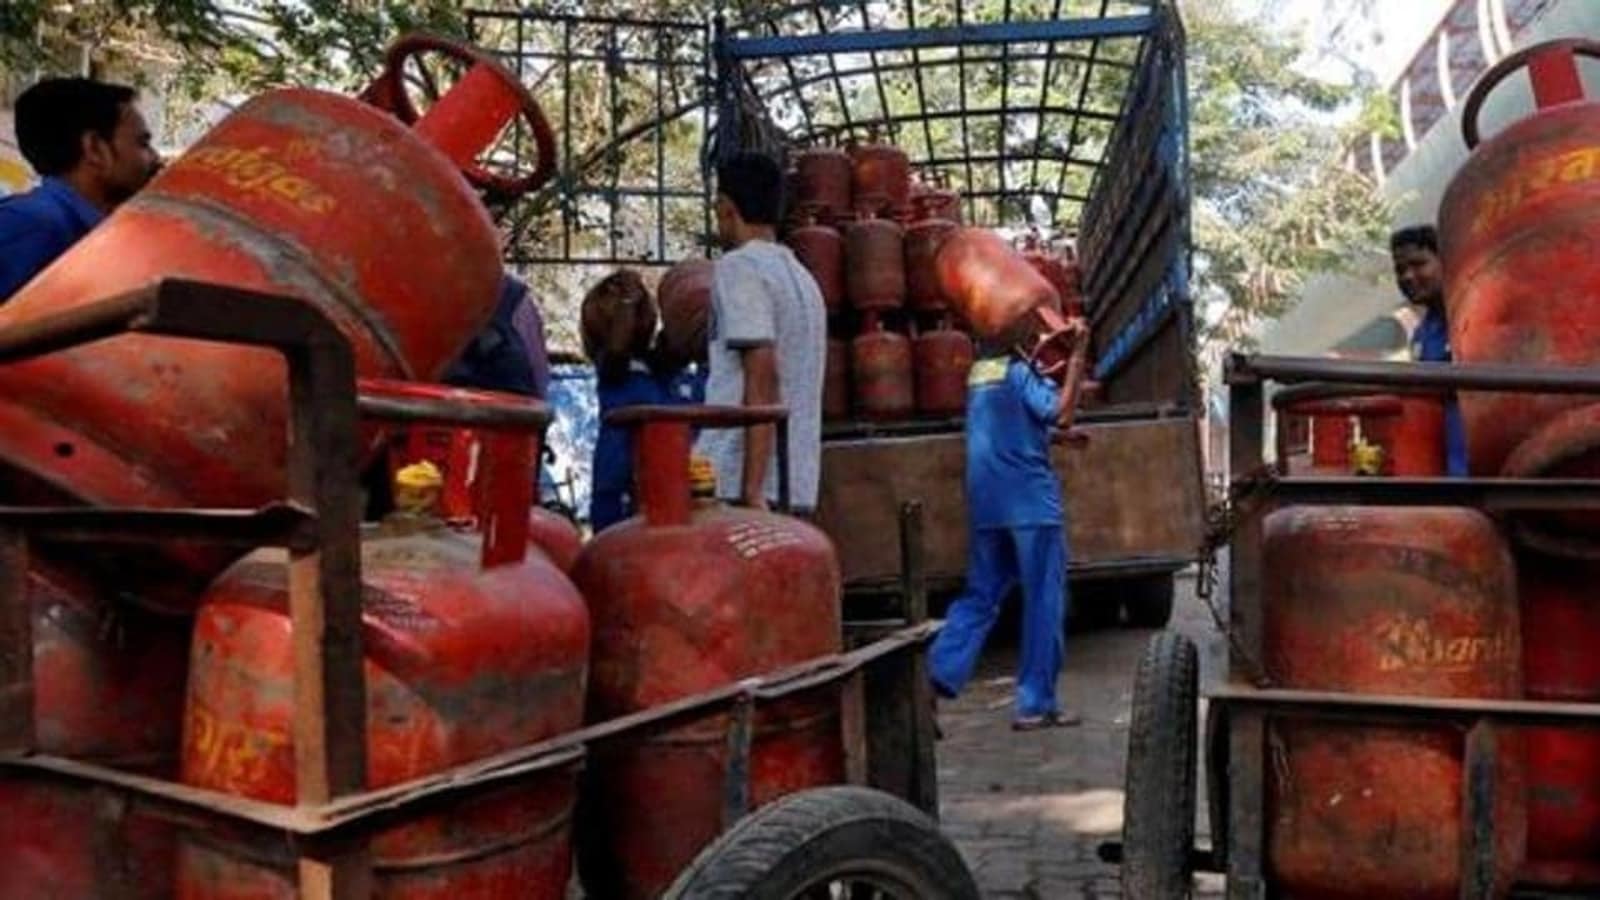 LPG cylinder price hiked by ₹25: Check latest rates here - Hindustan Times